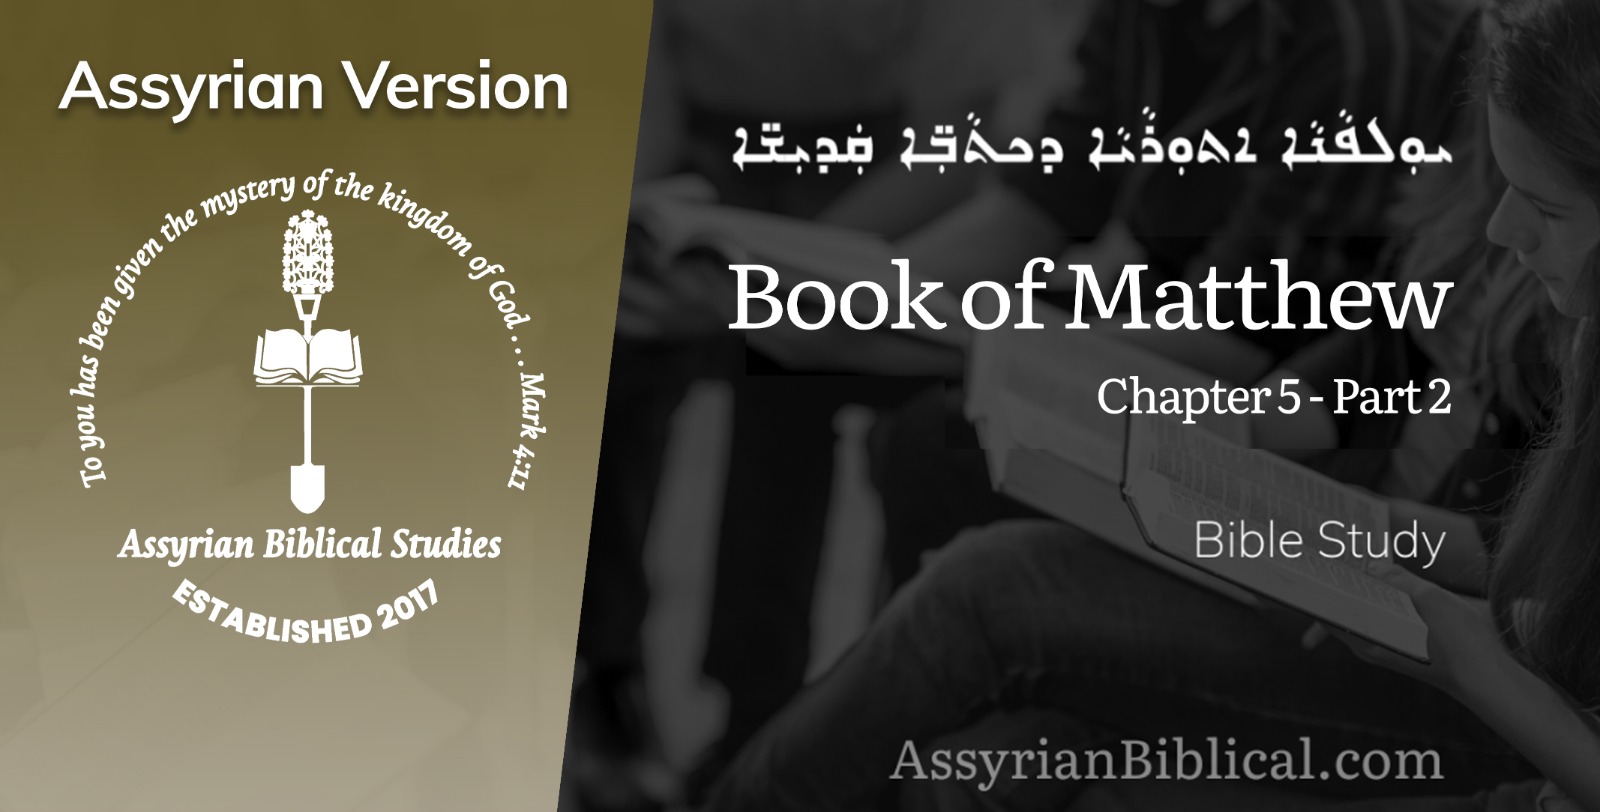 Image of video thumbnail for Book of Mathew Chapter 5 Part 2 in Assyrian